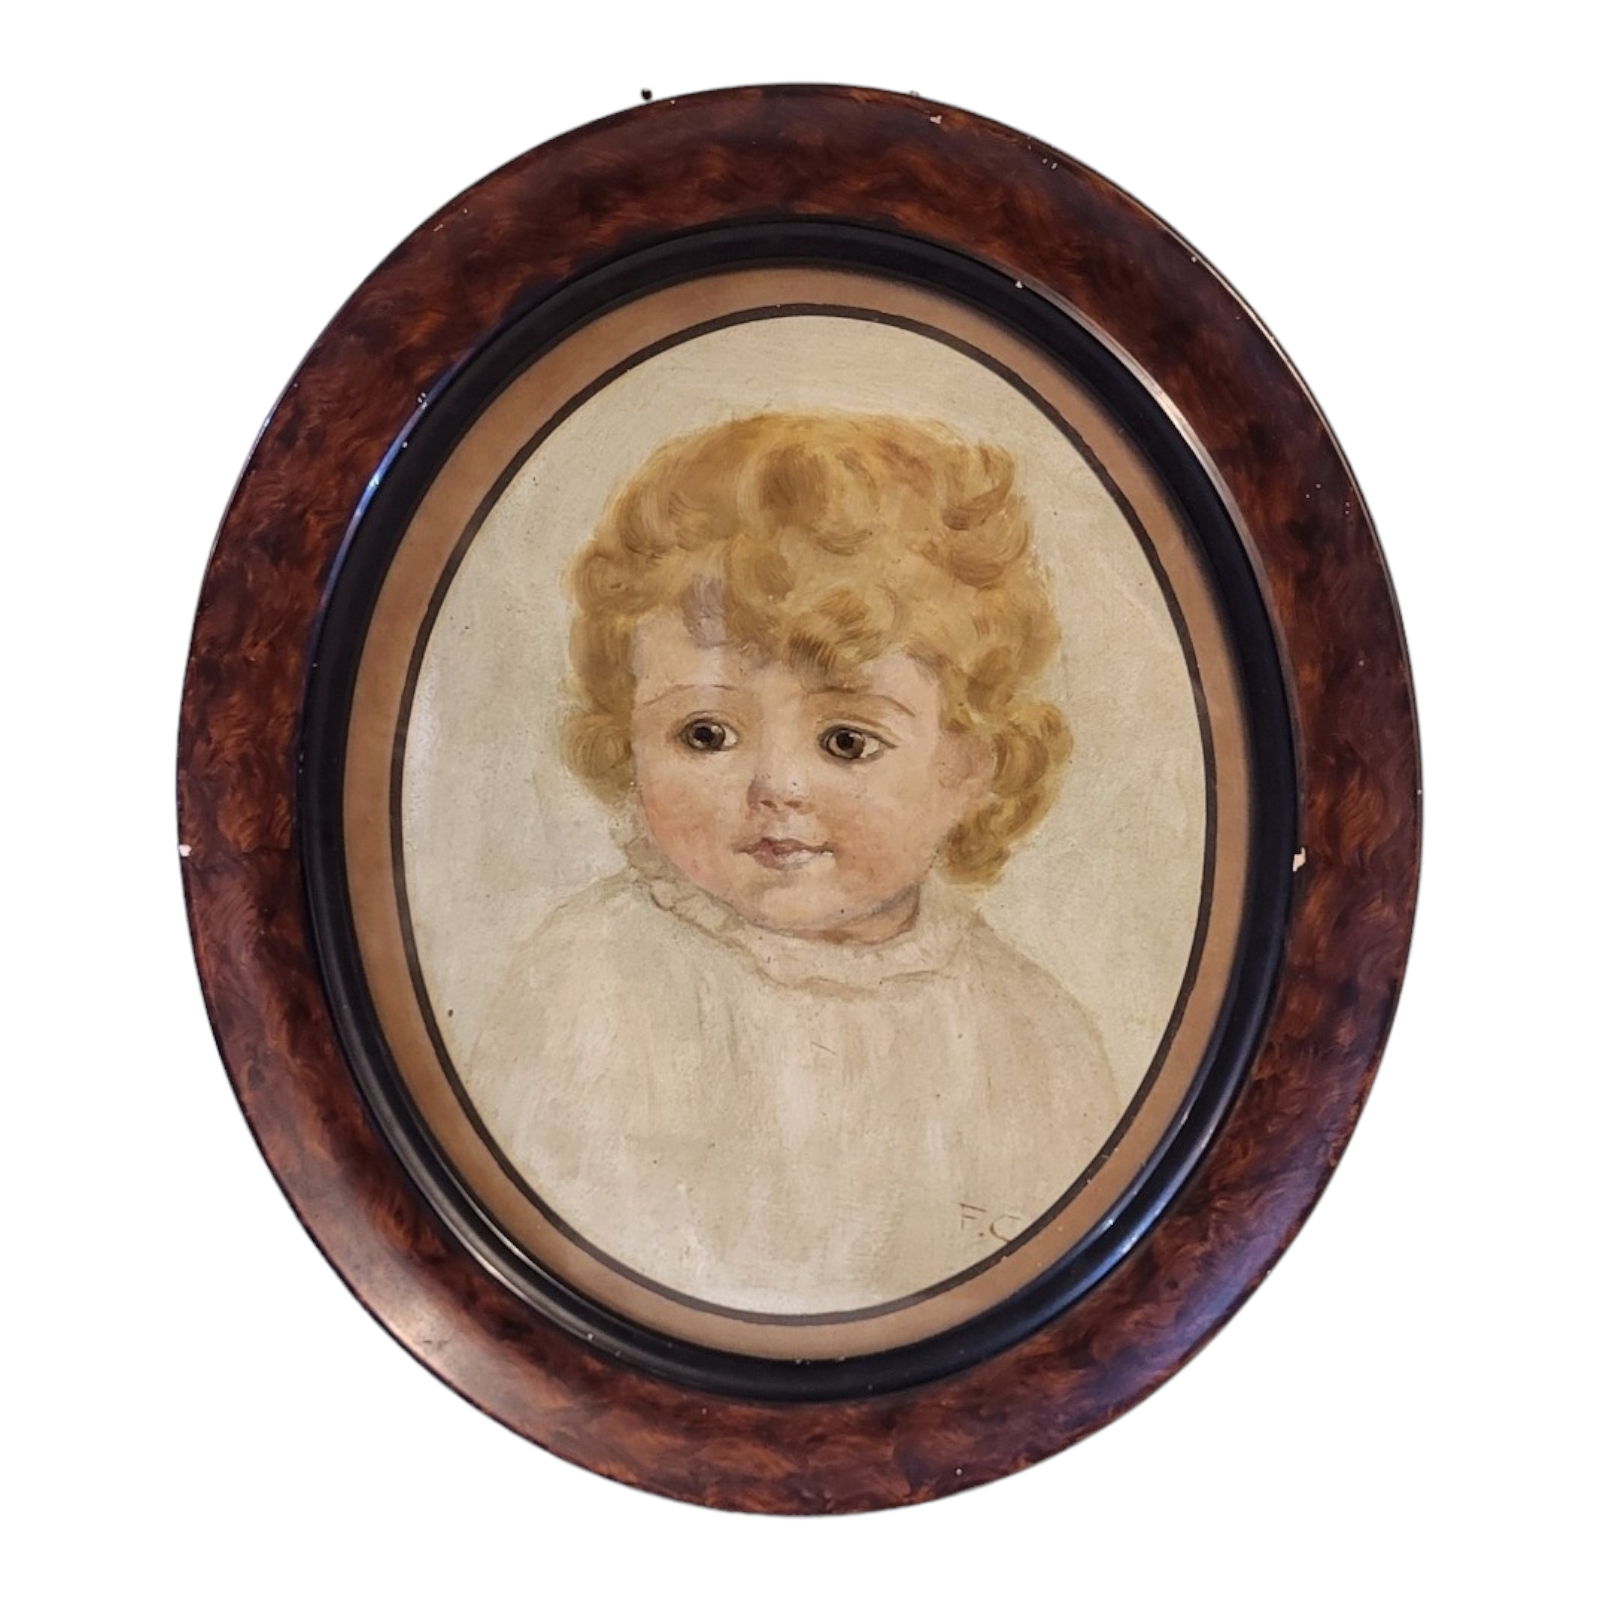 A LATE 19TH CENTURY ENGLISH SCHOOL OVAL OIL ON BOARD, PORTRAIT STUDY OF A LITTLE GIRL WITH BLONDE